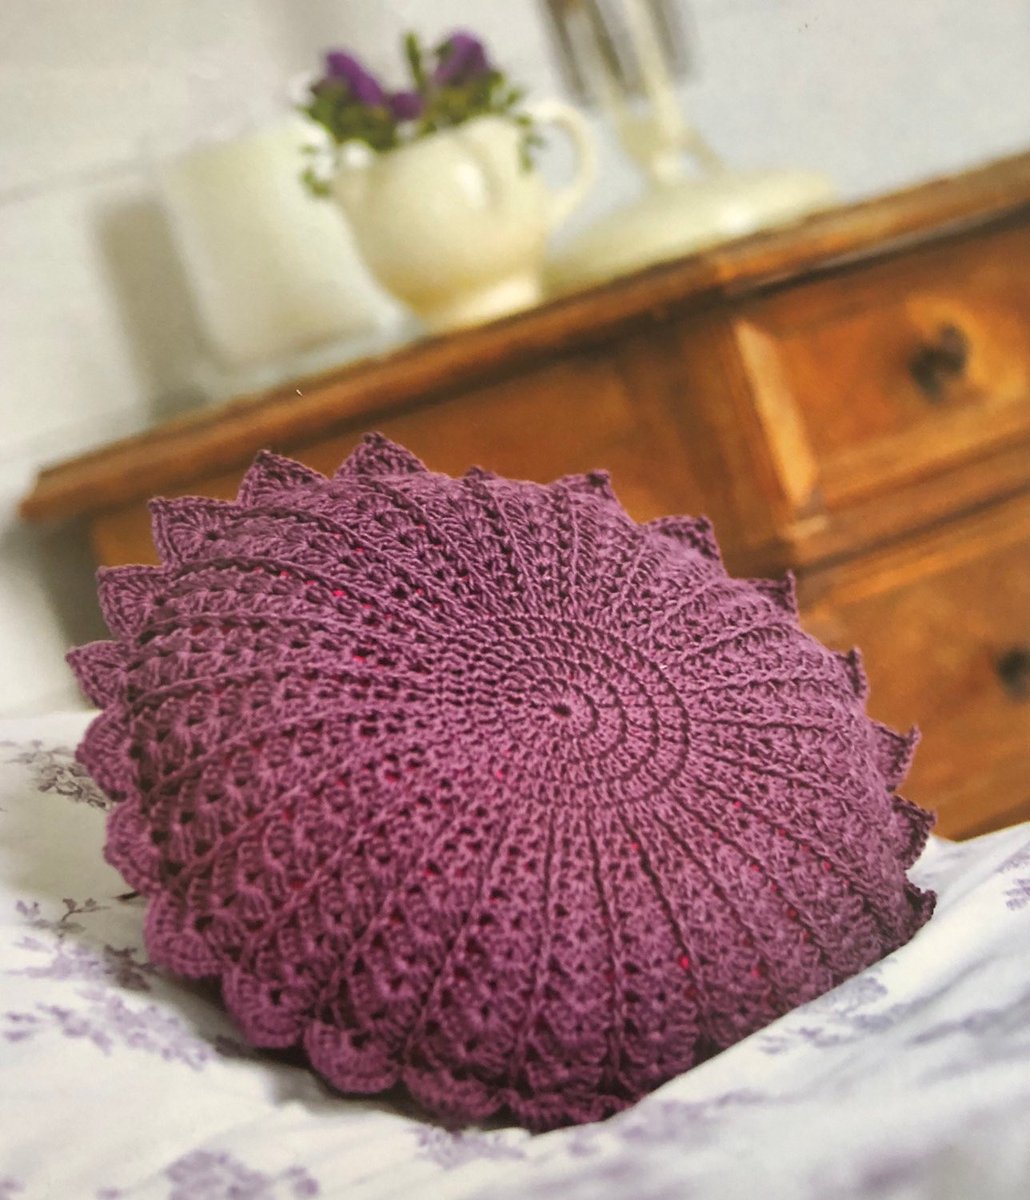 Excited to share this item from my shop: Crochet Round Petal Cushion Art Deco Pattern #craftbiz #ssb #yarn #cosy #warm #earlybiz #wip #quickmakes  #homeimprovement #crochet #crochetpattern #cushion #homewear #crafts #project #crochetcushion #easydiy etsy.me/3HAN4x8